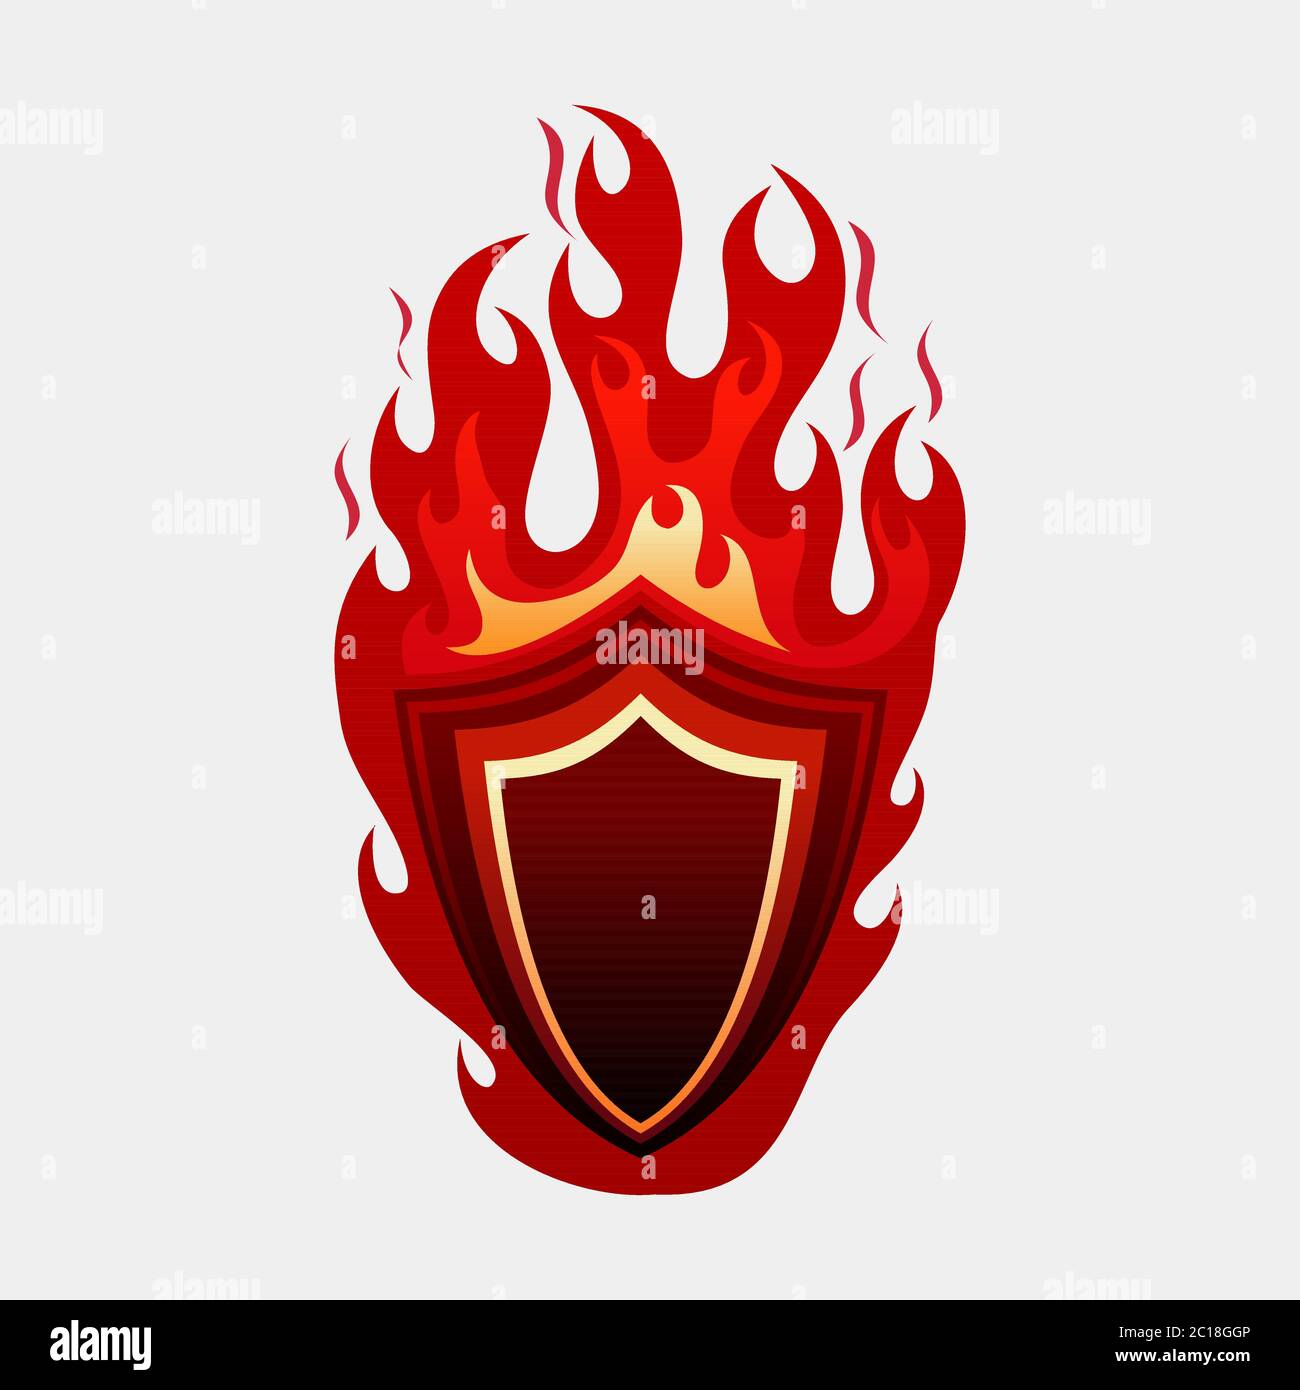 vector illustration of a shield burning in fire. Suitable for illustration of the spirit of defense, resistance, sports strength, and energy companies Stock Vector